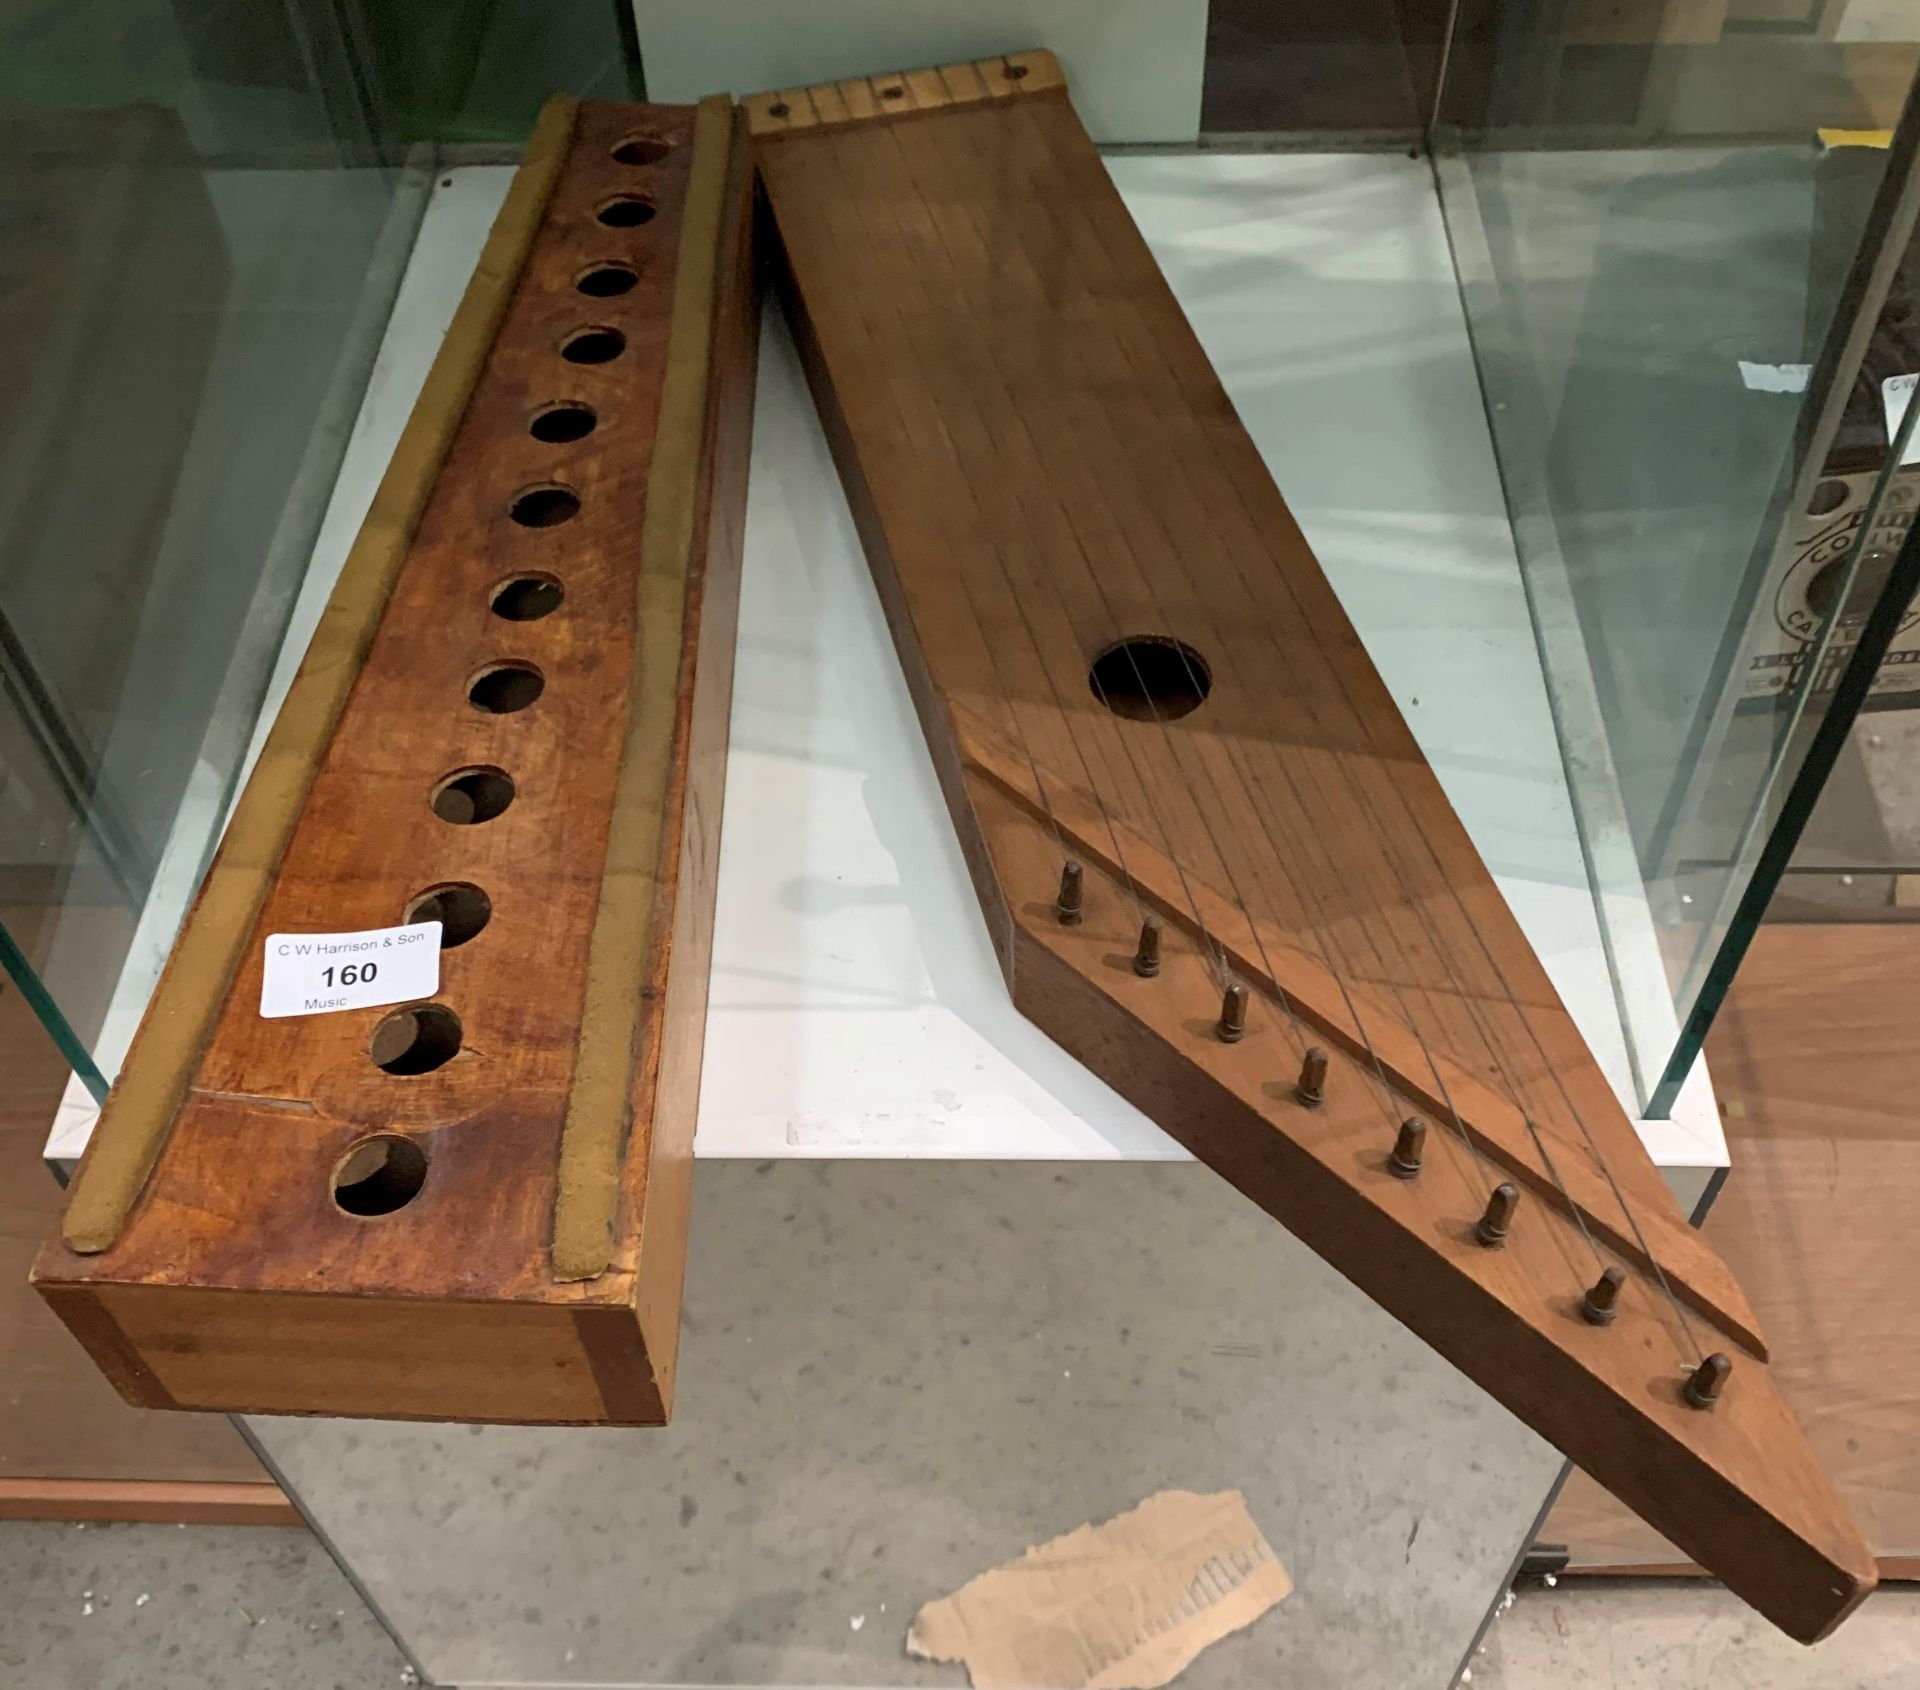 Two wooden string musical instruments